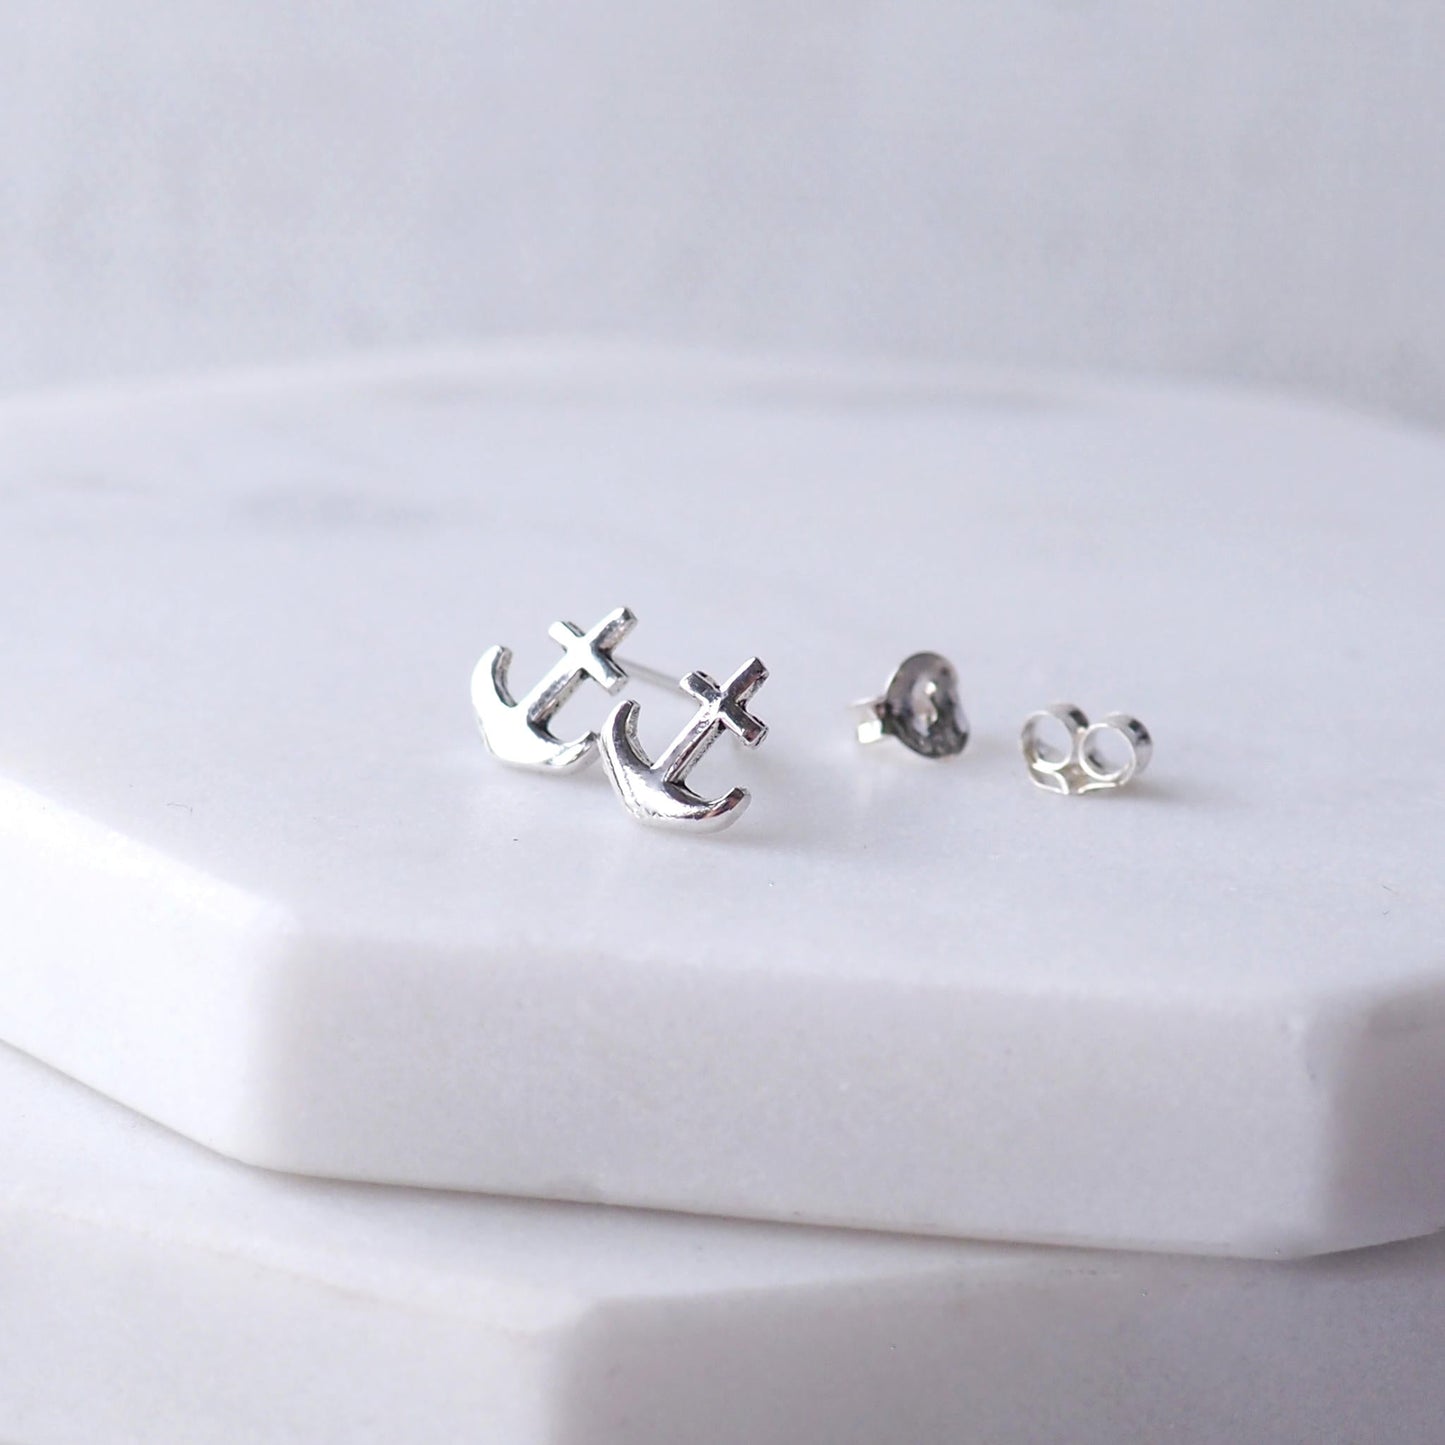 Silver Anchor Stud earrings. a small mtof earring with maritime anchor. Made in Scotland by maram jewellery